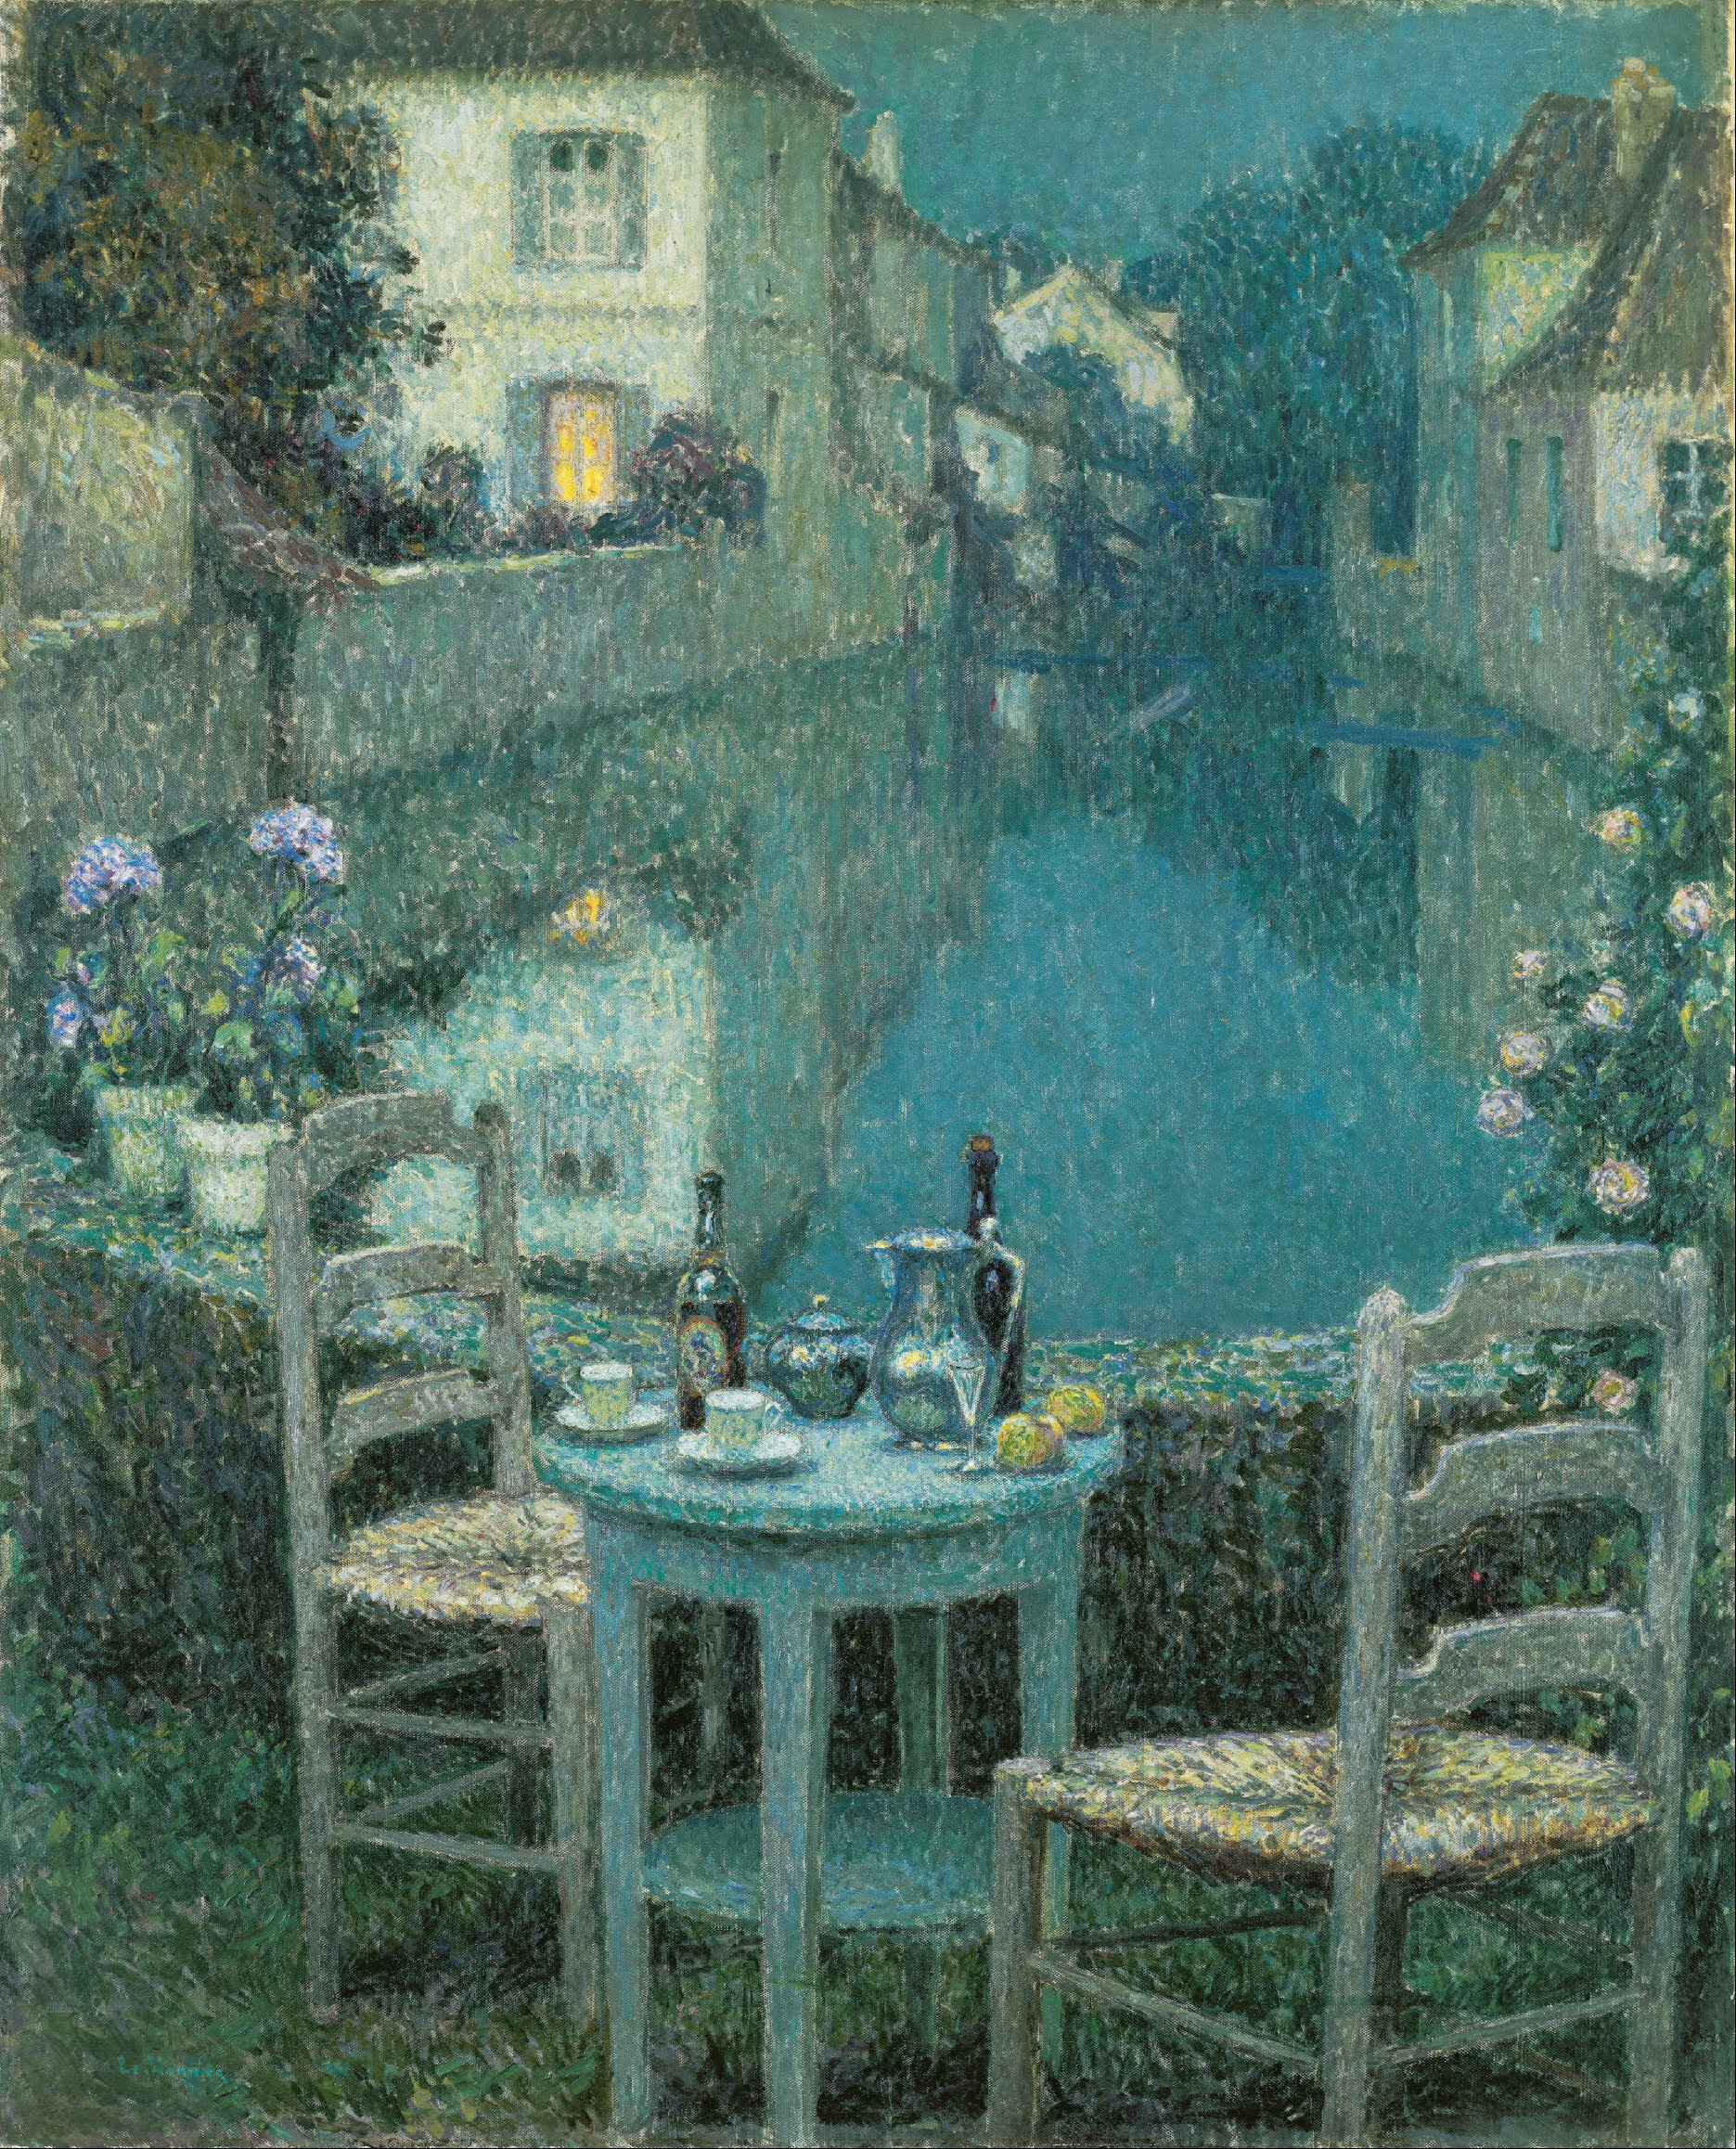 Small Table in Evening Dusk by Henri Le Sidaner - 1921 - 81.1 x 100 cm Ohara Museum of Art